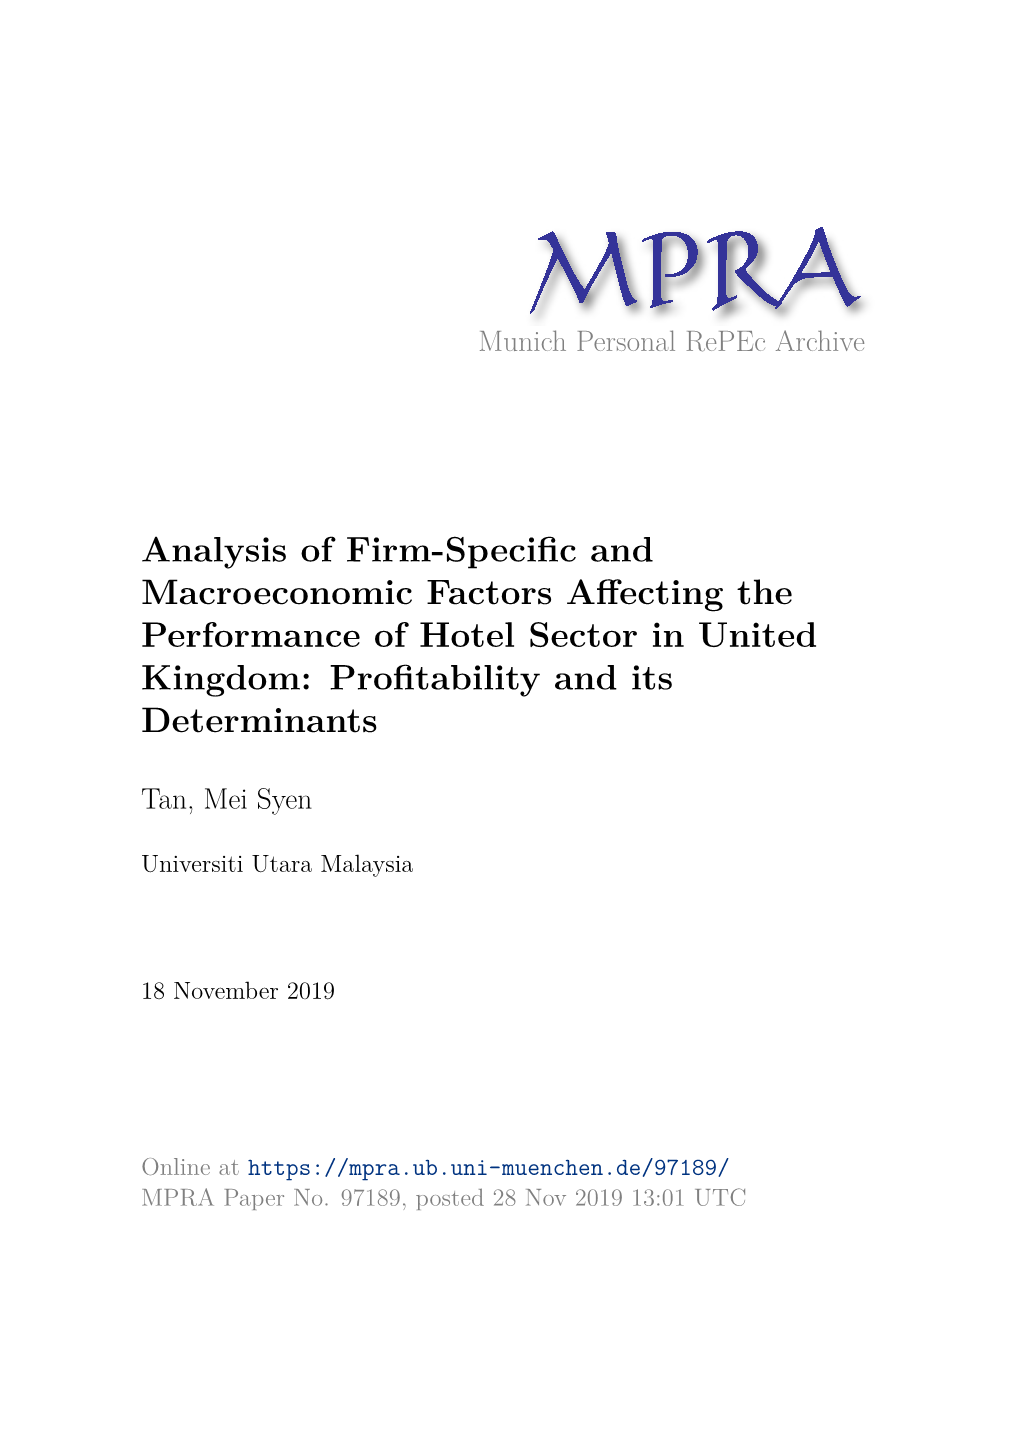 Analysis of Firm-Specific and Macroeconomic Factors Affecting the Performance of Hotel Sector in United Kingdom: Profitability and Its Determinants